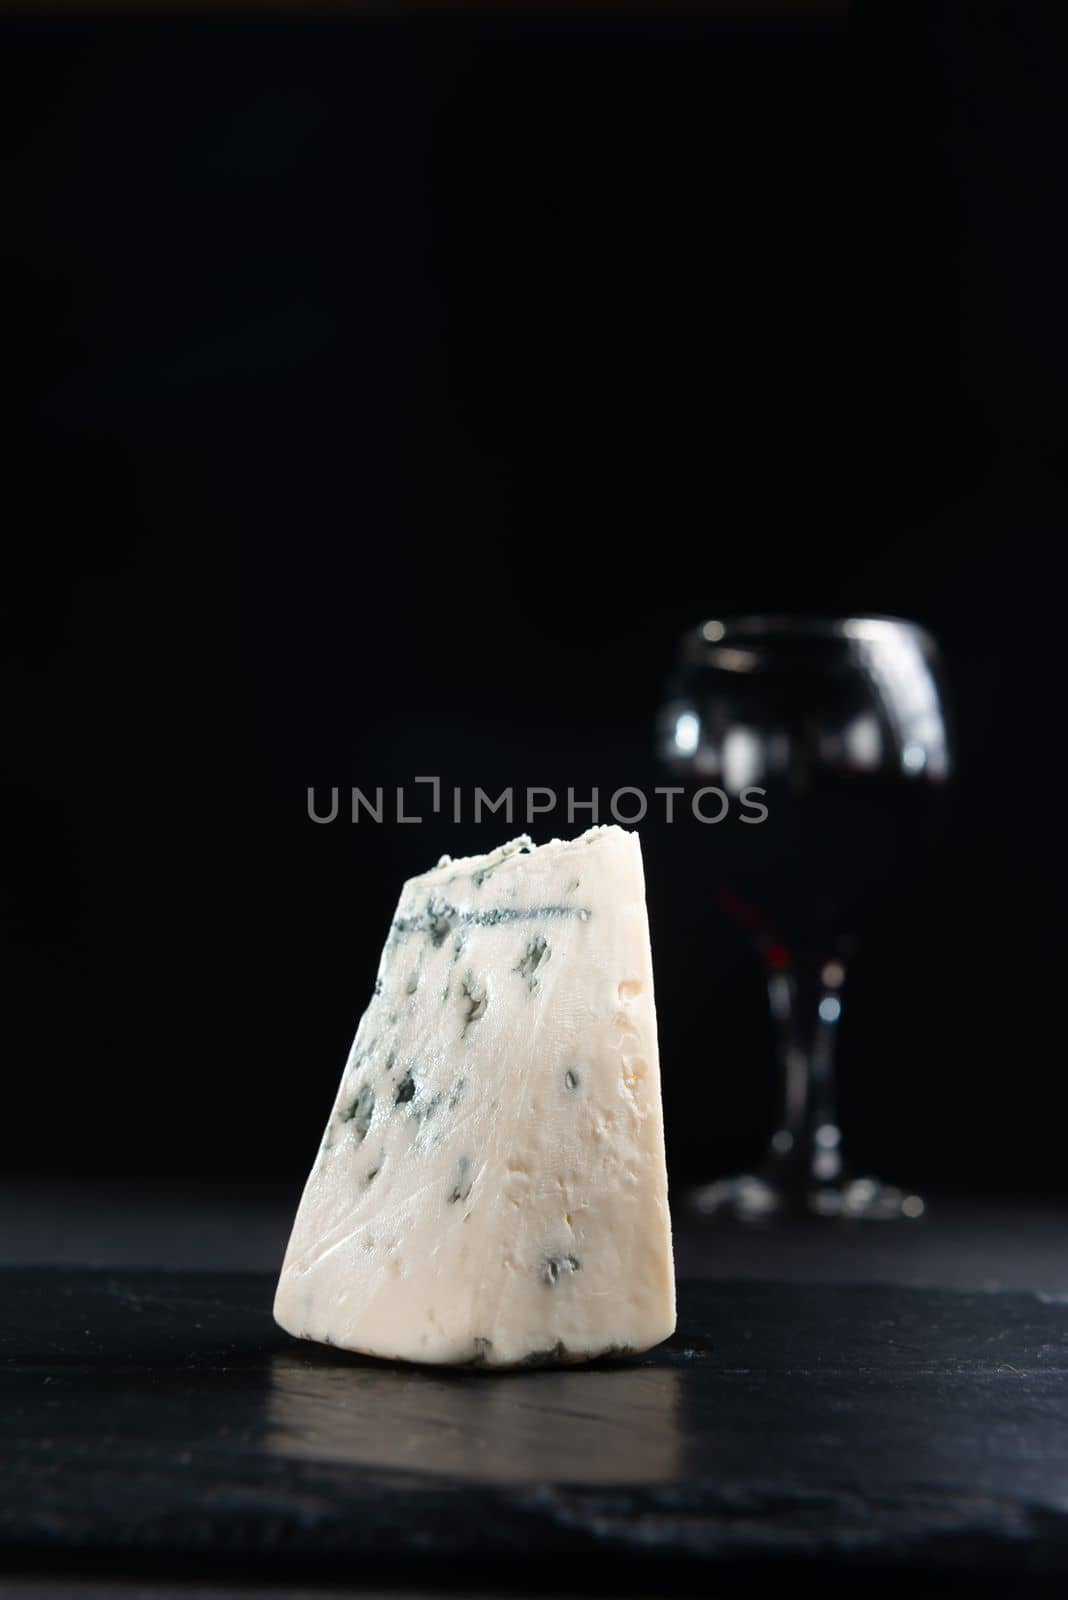 Slice of blue mold cheese Roquefort cheese on a dark background. Close-up view with copy space